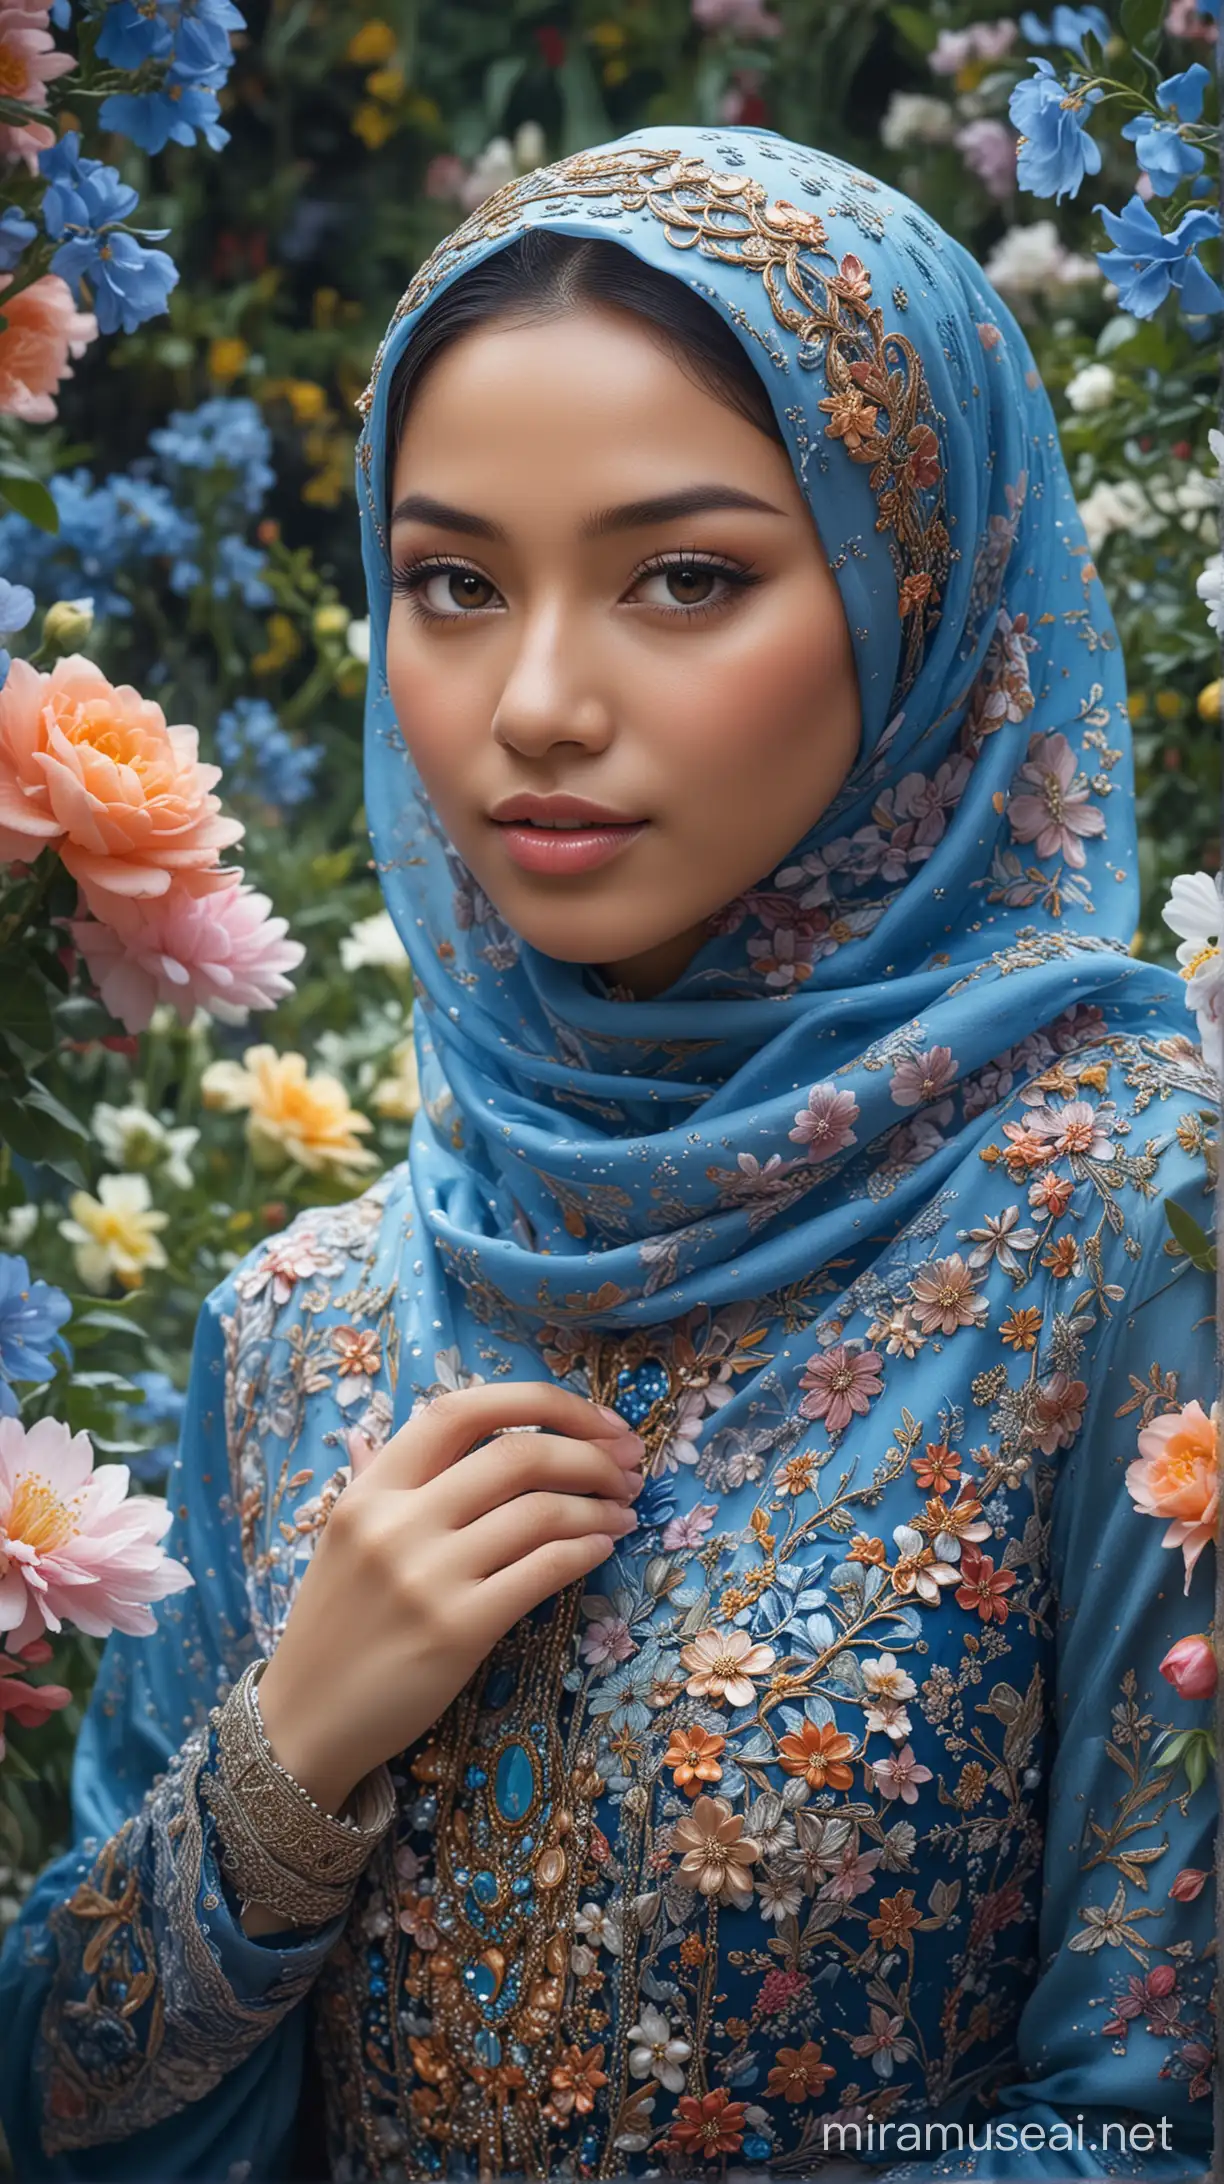 A beautiful girl from Indonesian in a detailed and colorful enviroment surrounded by flowers, wearing hijab and an elegan blue dress with intricate design, adorned with detailed jewelry, holding a Blooming flower delicately, with various types blossoming flowers creating an enchanting atmosphere, and an ethereal glow surrounding flowers.